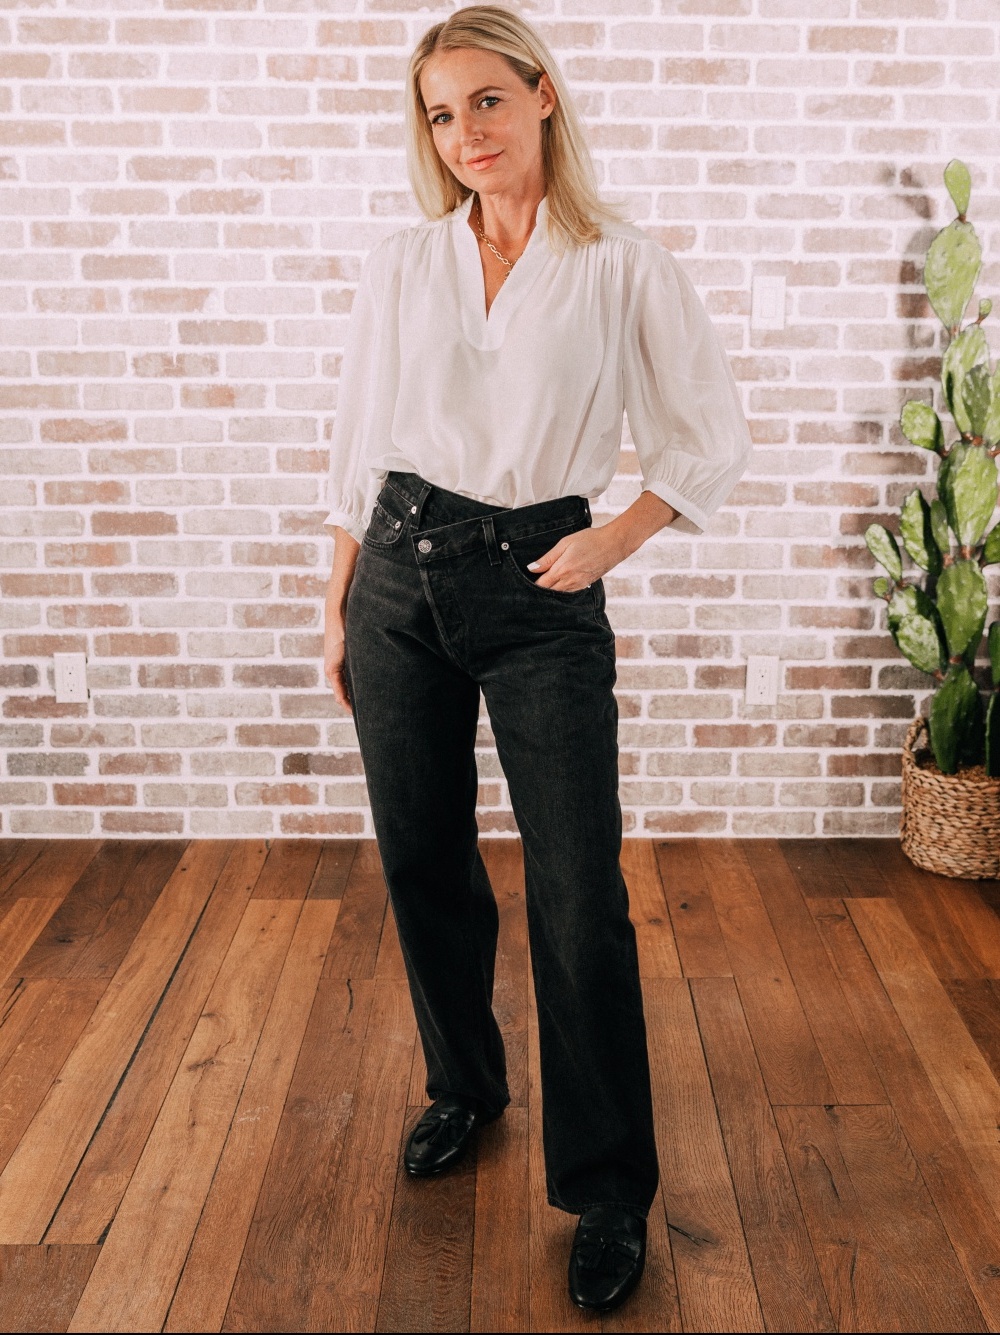 Stylish Work From Home Outfits, Fashion blogger Erin Busbee of BusbeeStyle.com wearing a white blouse by Frame with oversized black jeans by Agolde with asymmetrical button closure in Telluride, Colorado